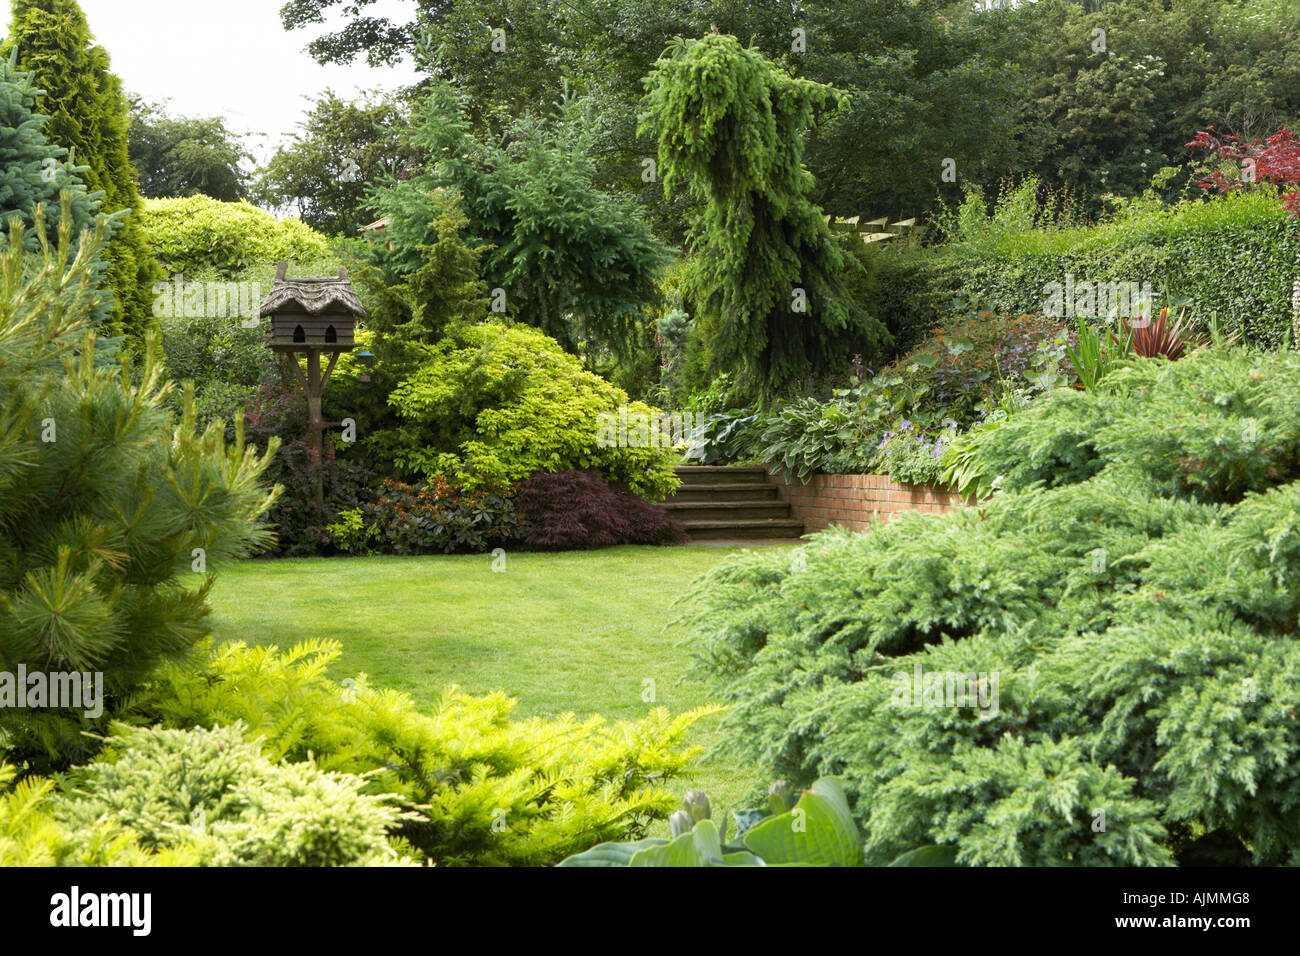 Garden with conifers Stock Photo